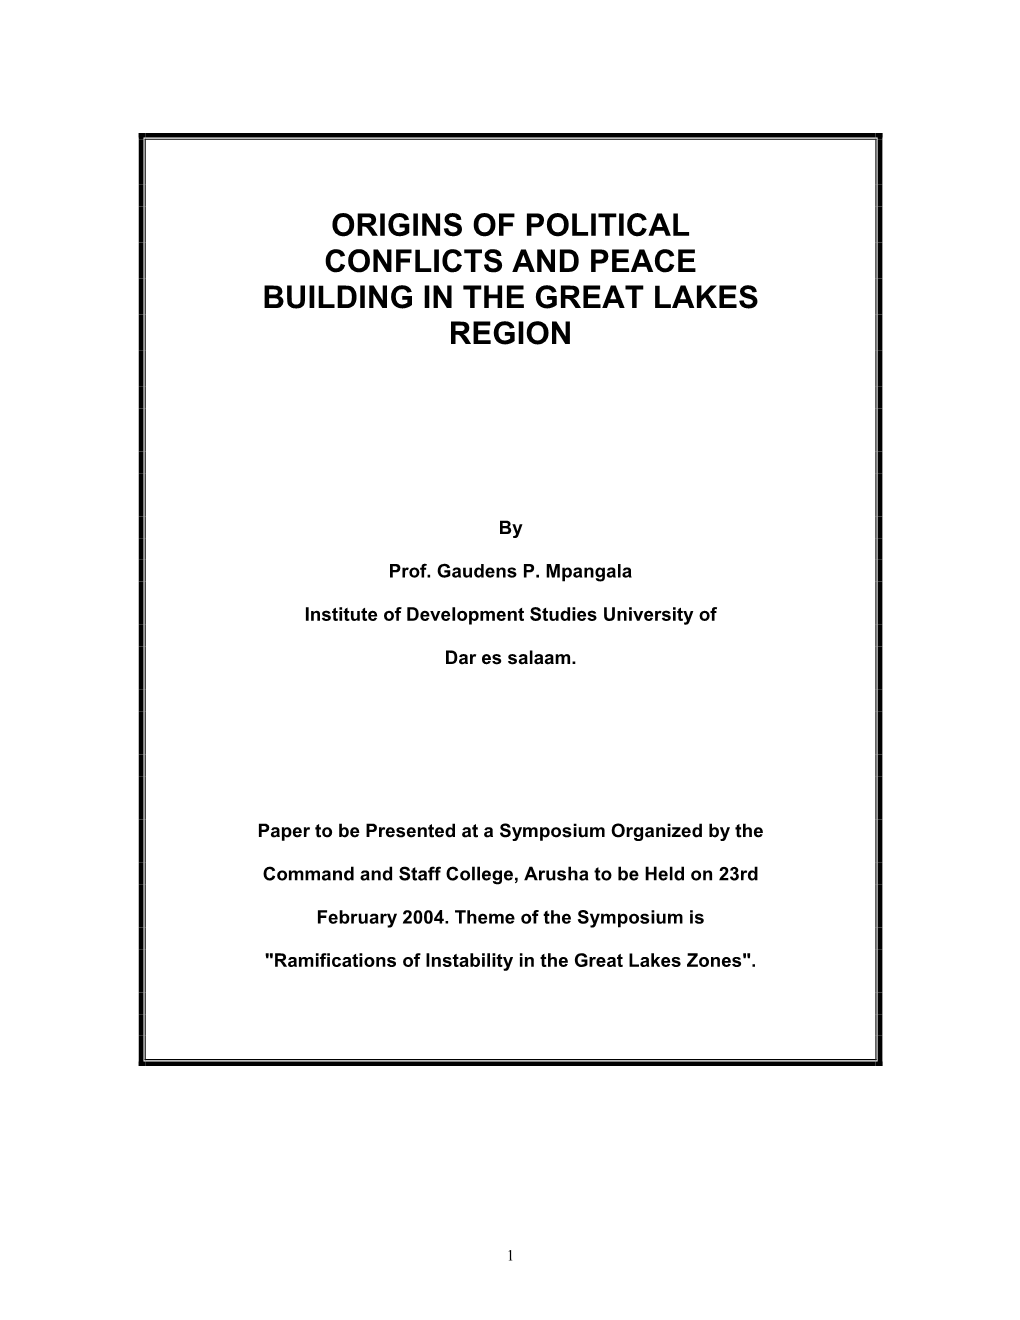 Origins of Political Conflicts and Peace Building in the Great Lakes Region